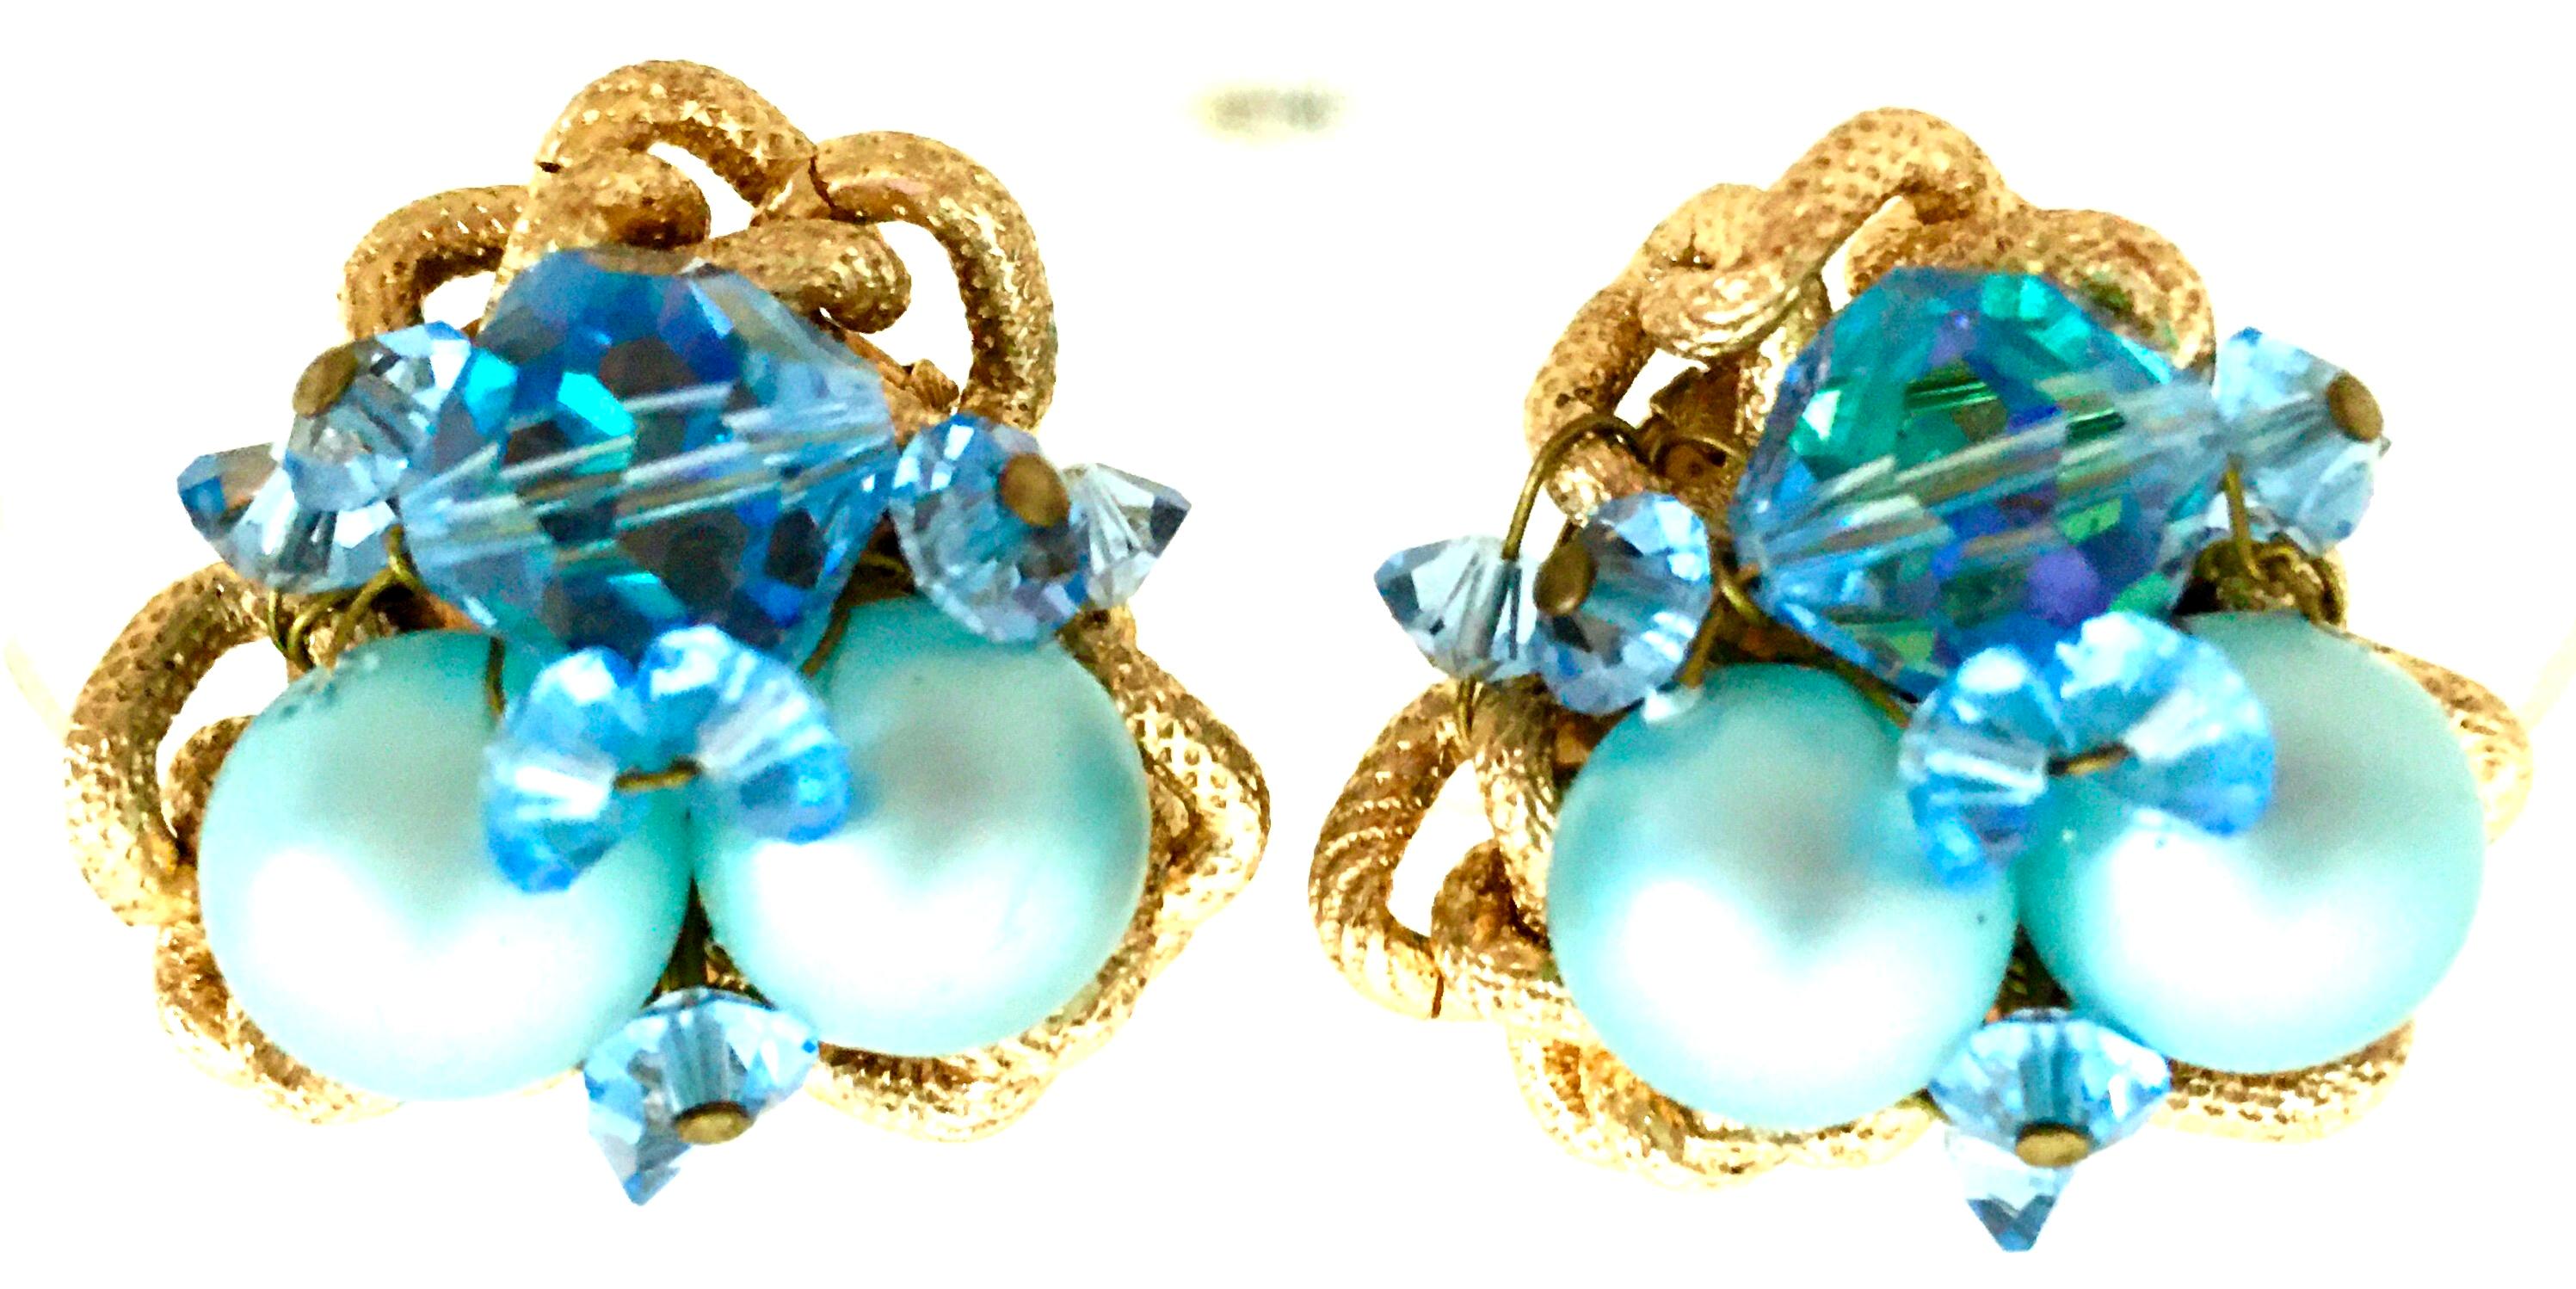 20th Century Gold Plate & Blue Bead Clip Style Pair Of Earrings. These coveted and rare pair of earrings feature a dimension design with cut and faceted sapphire blue crystal beads, robins egg blue faux pearl beads and a gold stamped rope stye